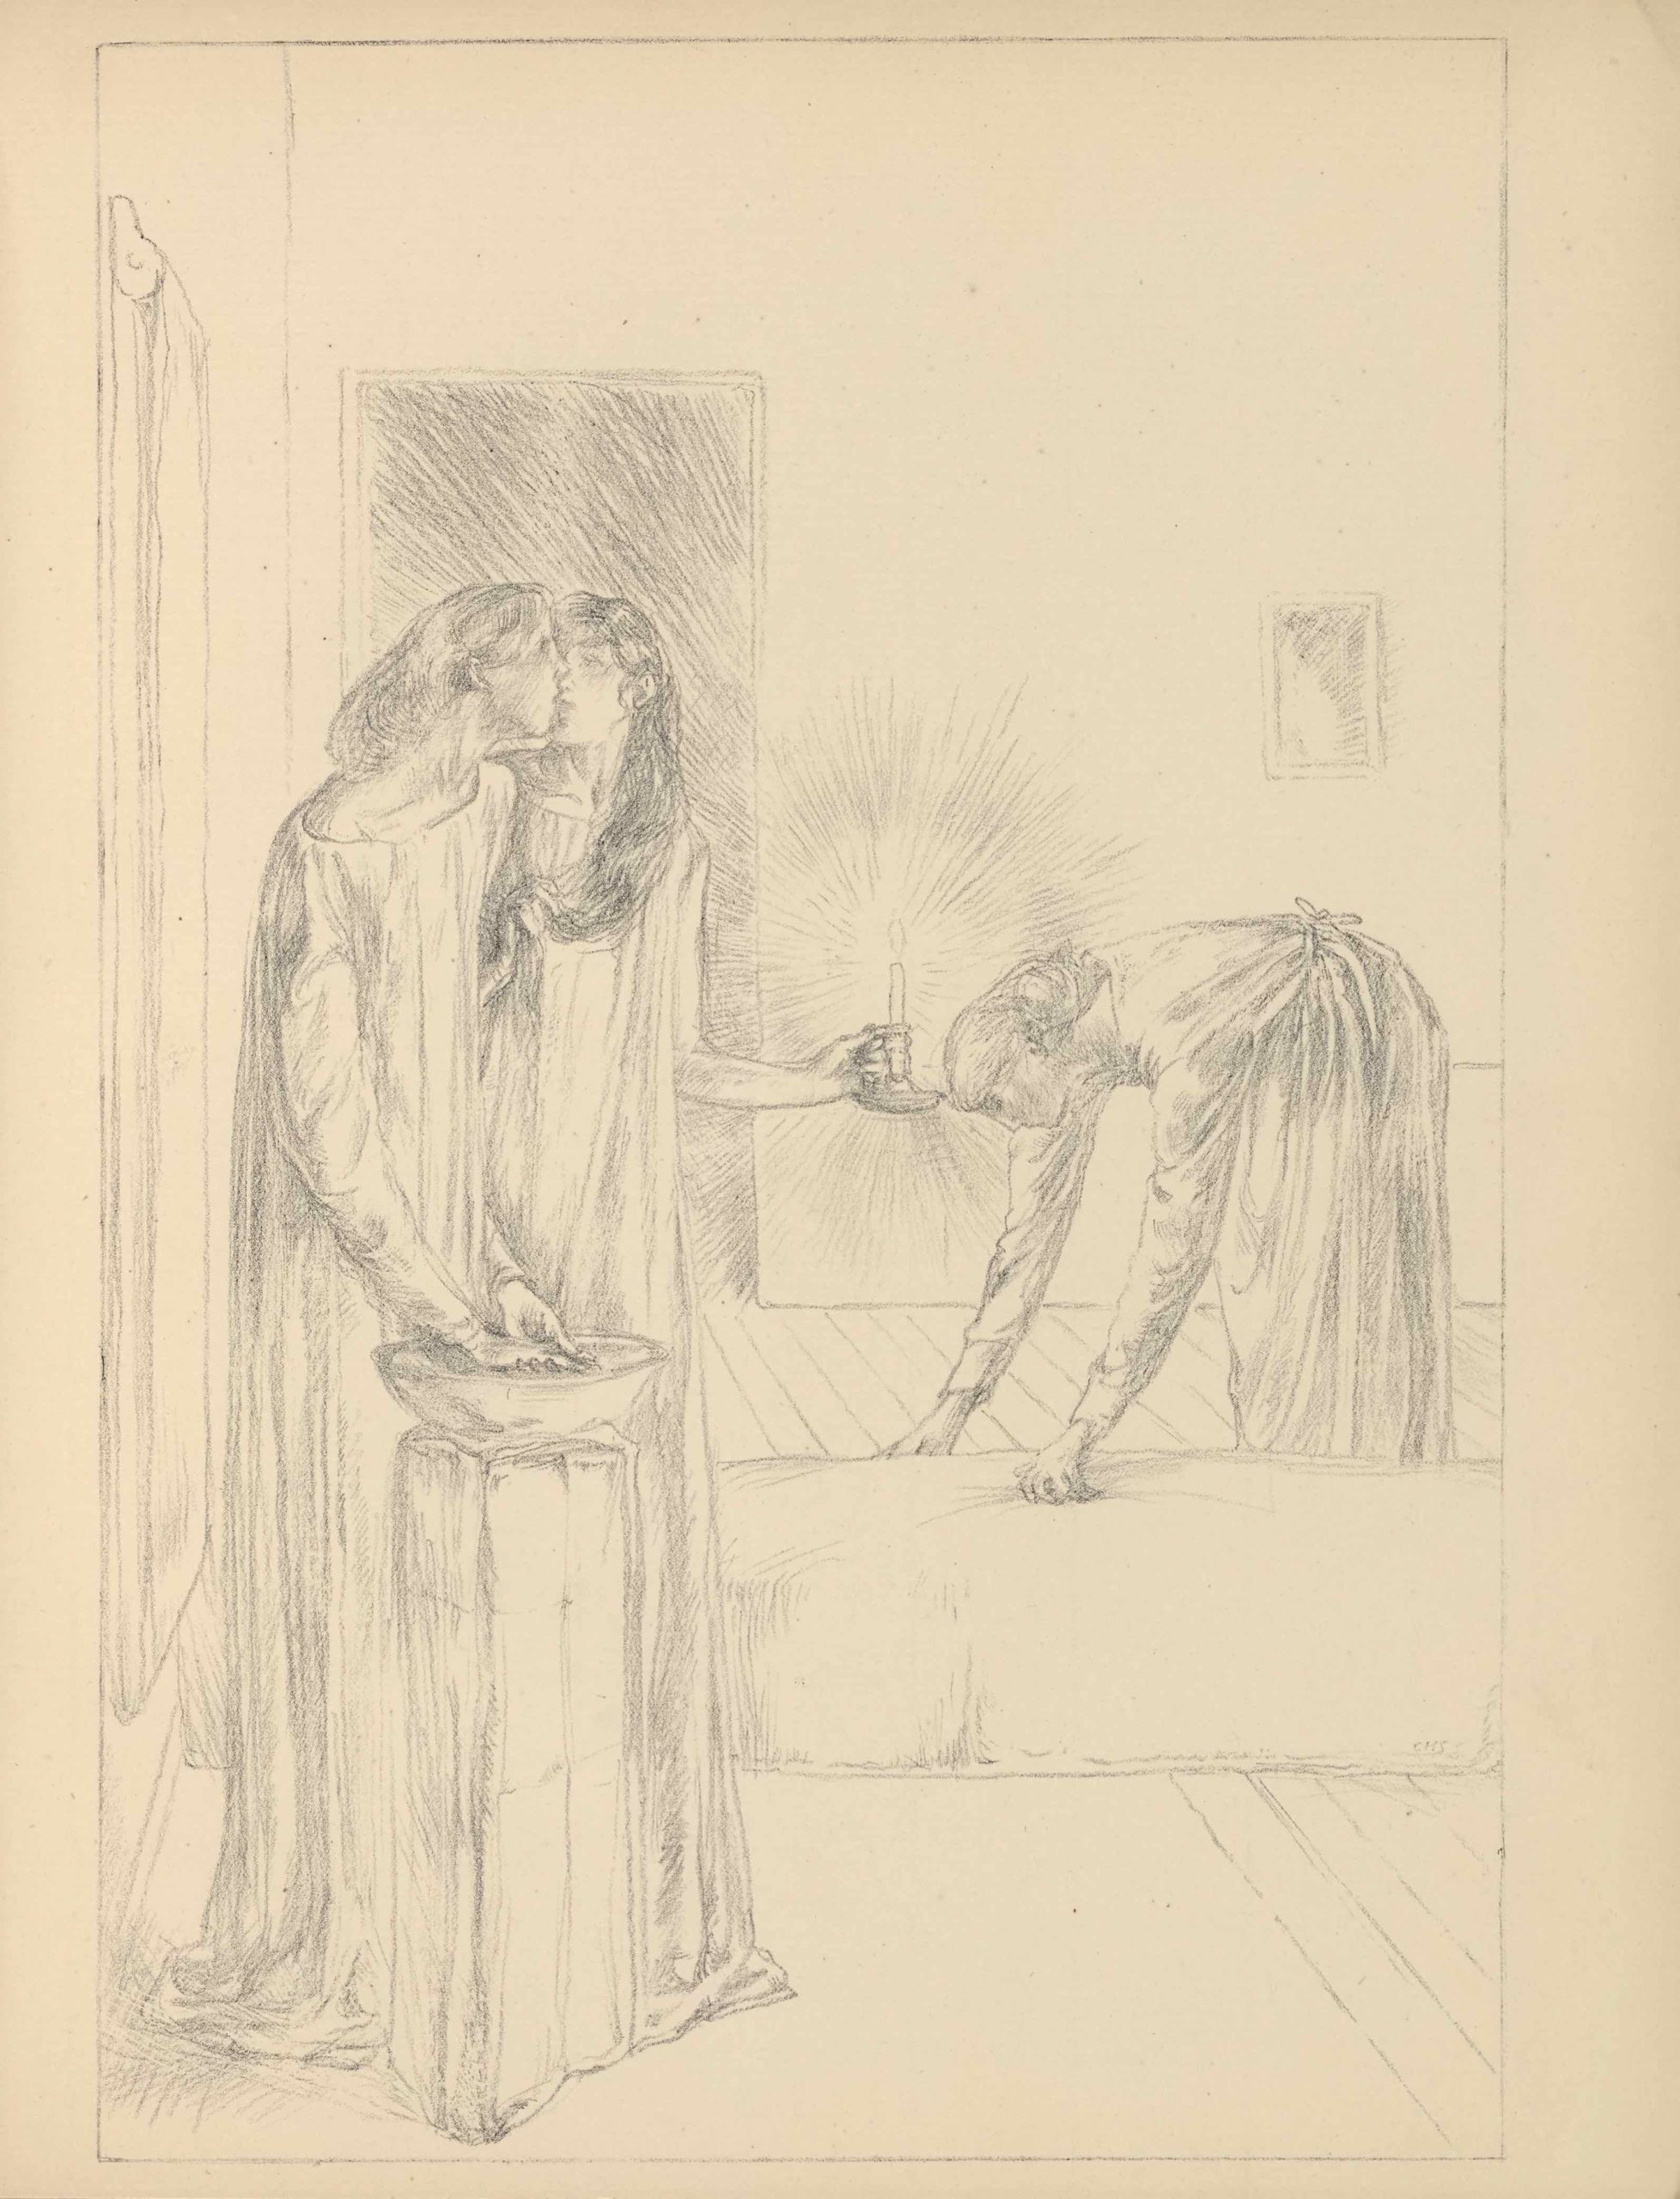 The lithographic image is set into a thinly-lined rectangle on the centre of the page. The image, represented in soft grey tones, shows a view into a bedroom in which three women are preparing for night. In the left foreground stand two women in long nightdresses in front of an open doorway beside a curtained window on the leftmost wall of the room. They stand in front of a wash basin set upon a draped stone pillar. The leftmost woman is positioned in three-quarter posture, washing her hands in the basin as she turns to kiss the woman beside her. Her hair is bound on the back of her neck and her night dress slips off of her right shoulder. The women face each other as they kiss. The woman beside her has long hair hanging down her front which she clasps in her right hand. Her left hand holds a flaming candlestick out to her left. The candlestick is centred in the image and its light radiates outwards. Nearby, in the middle ground and centre right, a woman wearing an apron with her hair in a snood bends over at 90 degrees to make up a bed or mattress on the ground. The bed is between the pair of women in the foreground and the woman in the middle ground. The floor is composed of diagonal planks of wood. On the wall above the woman making the bed is a framed mirror that catches and radiates the candle’s light.